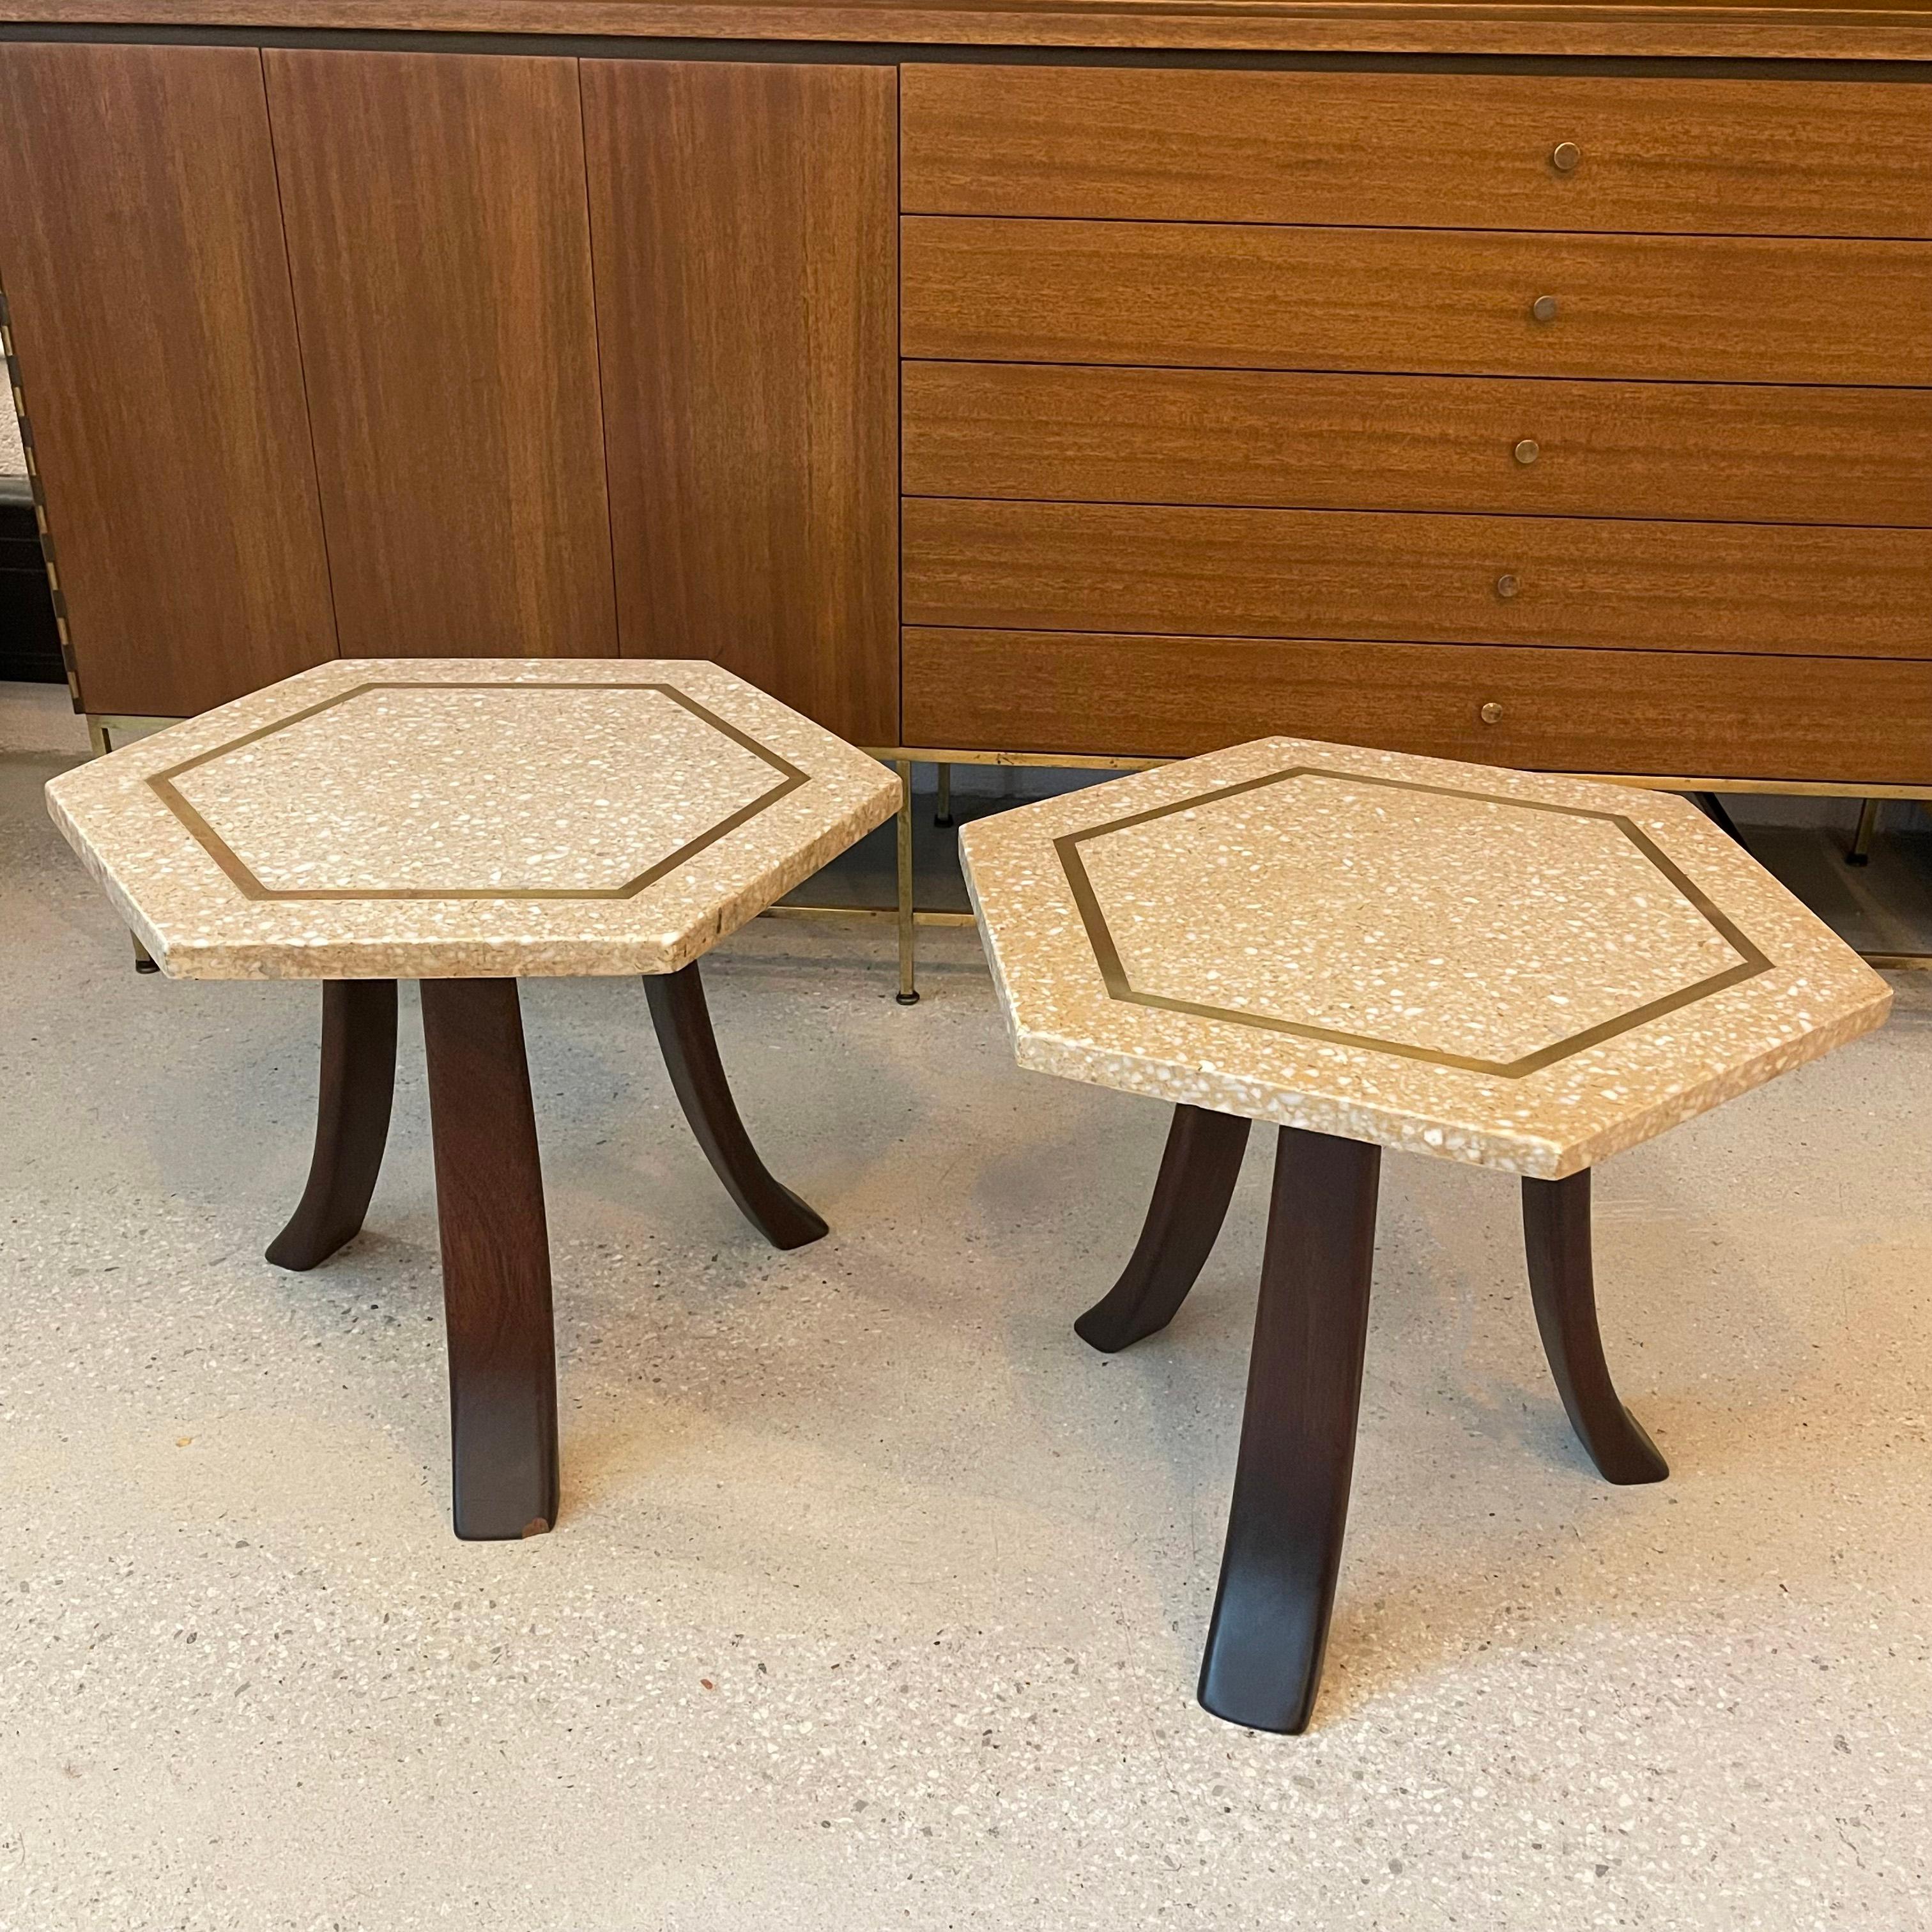 Pair of mid-century modern, Moroccan influenced, side/end tables by Harvey Probber feature hexagonal shaped, terrazzo stone tops with brass inlay on three sloping mahogany legs. The terrazzo tops are a warm hue with contrasting dark mahogany